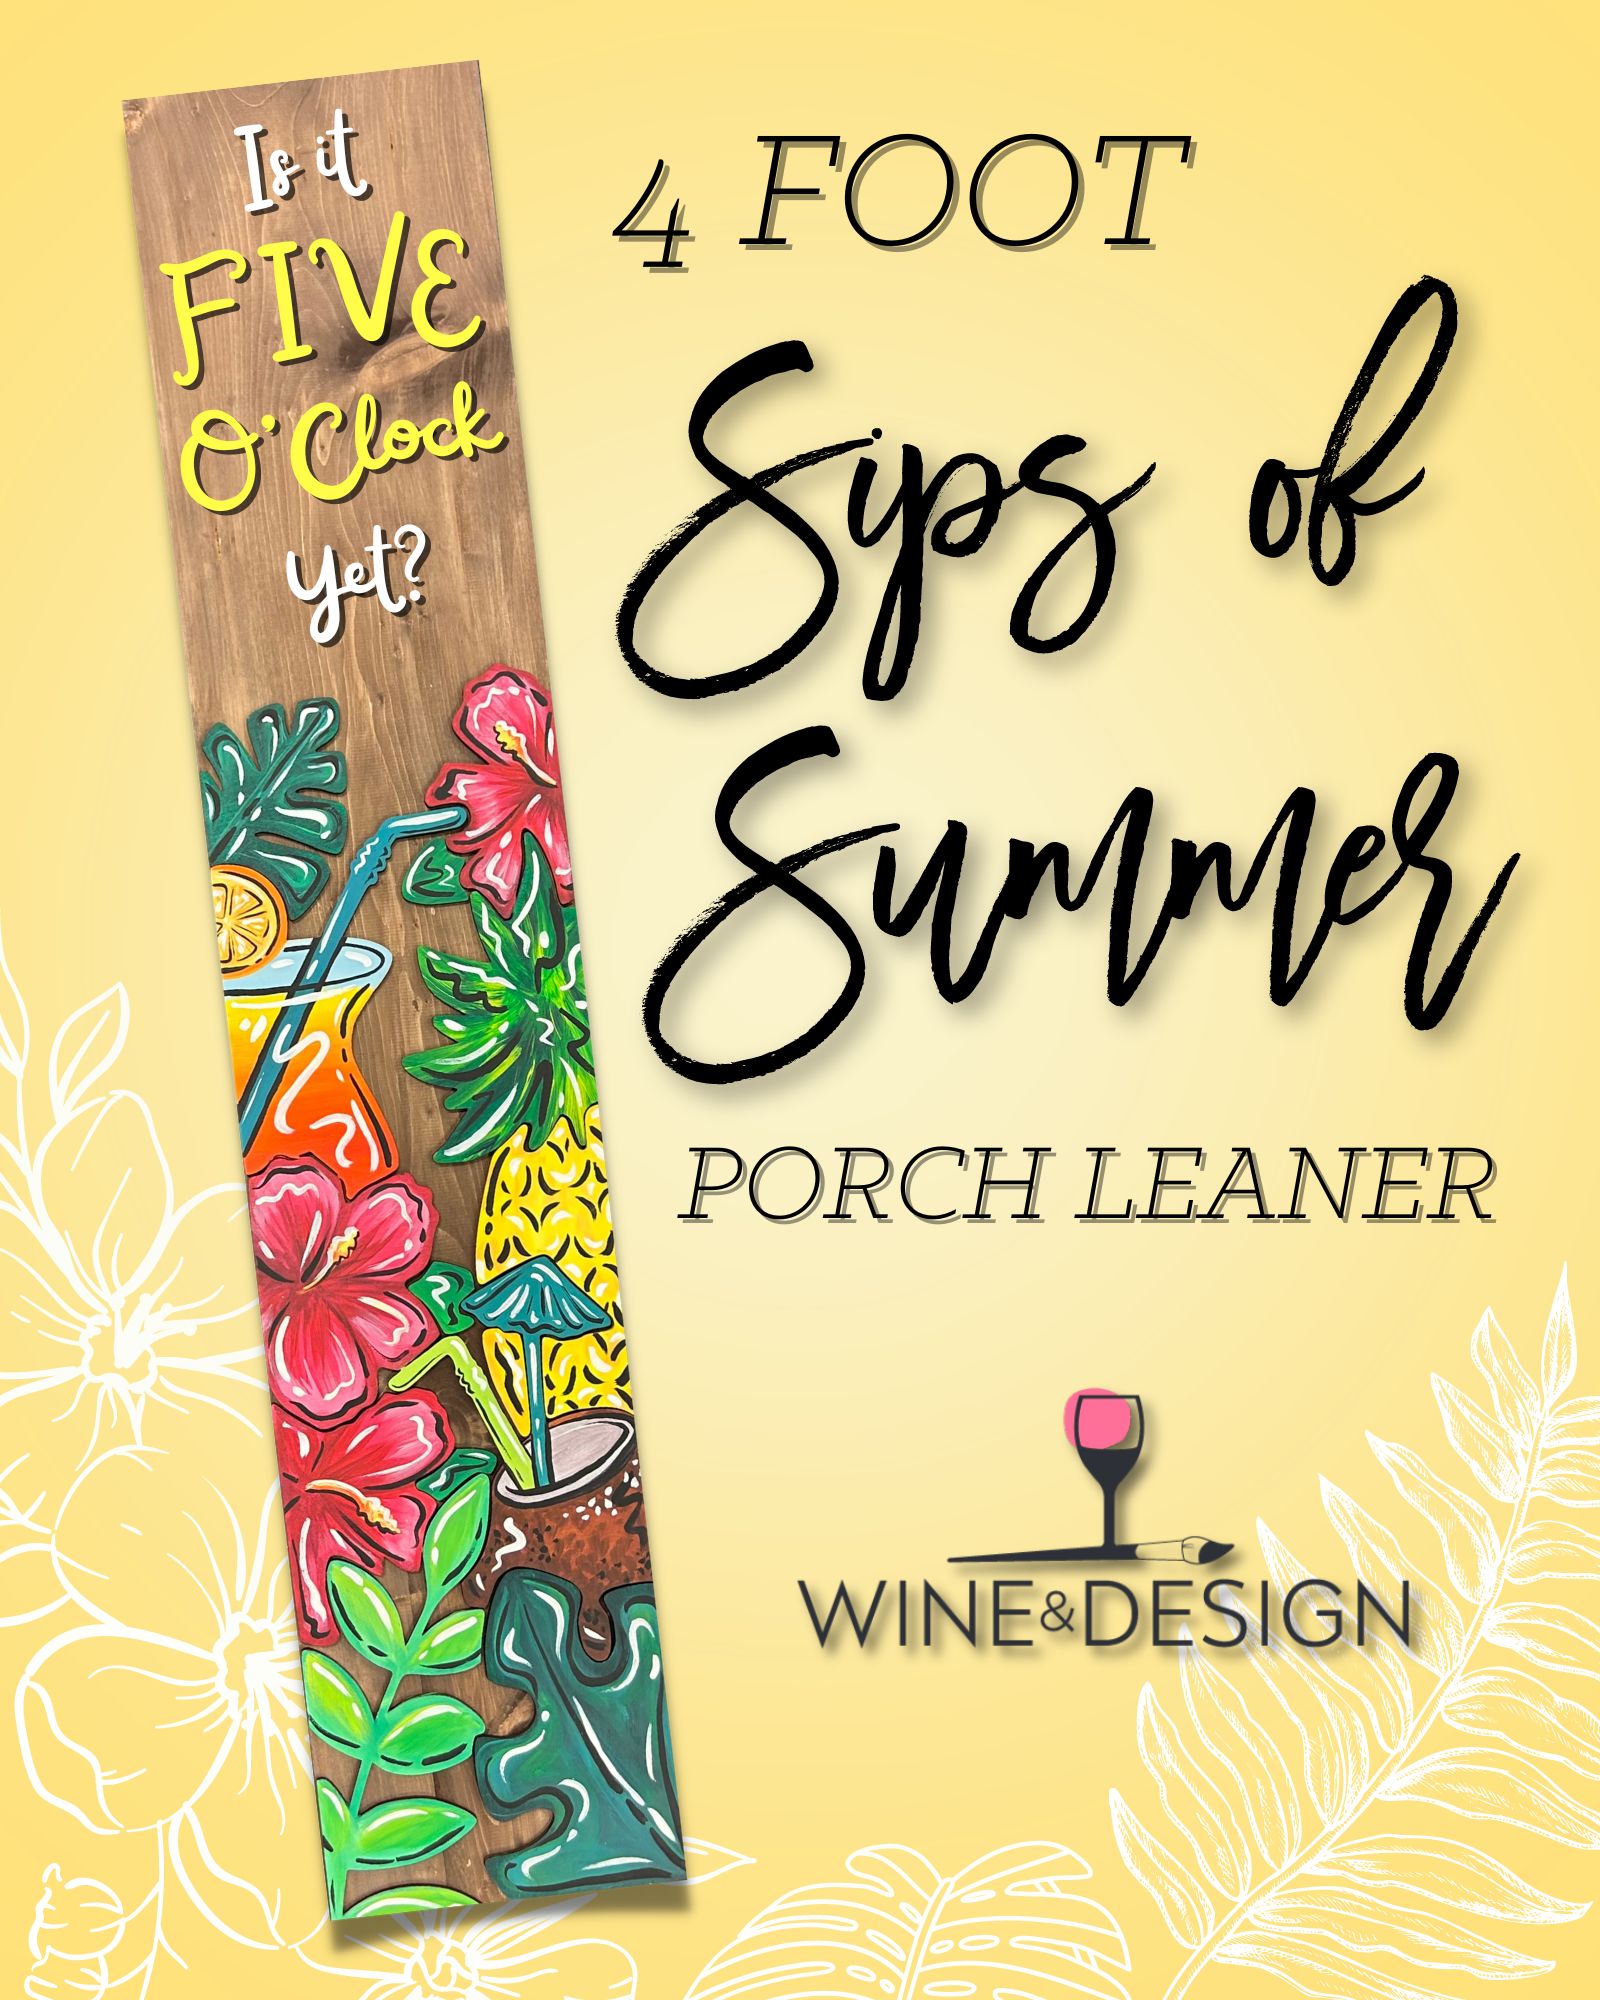 BRAND NEW! Sips of Summer 4 Foot Porch Leaner